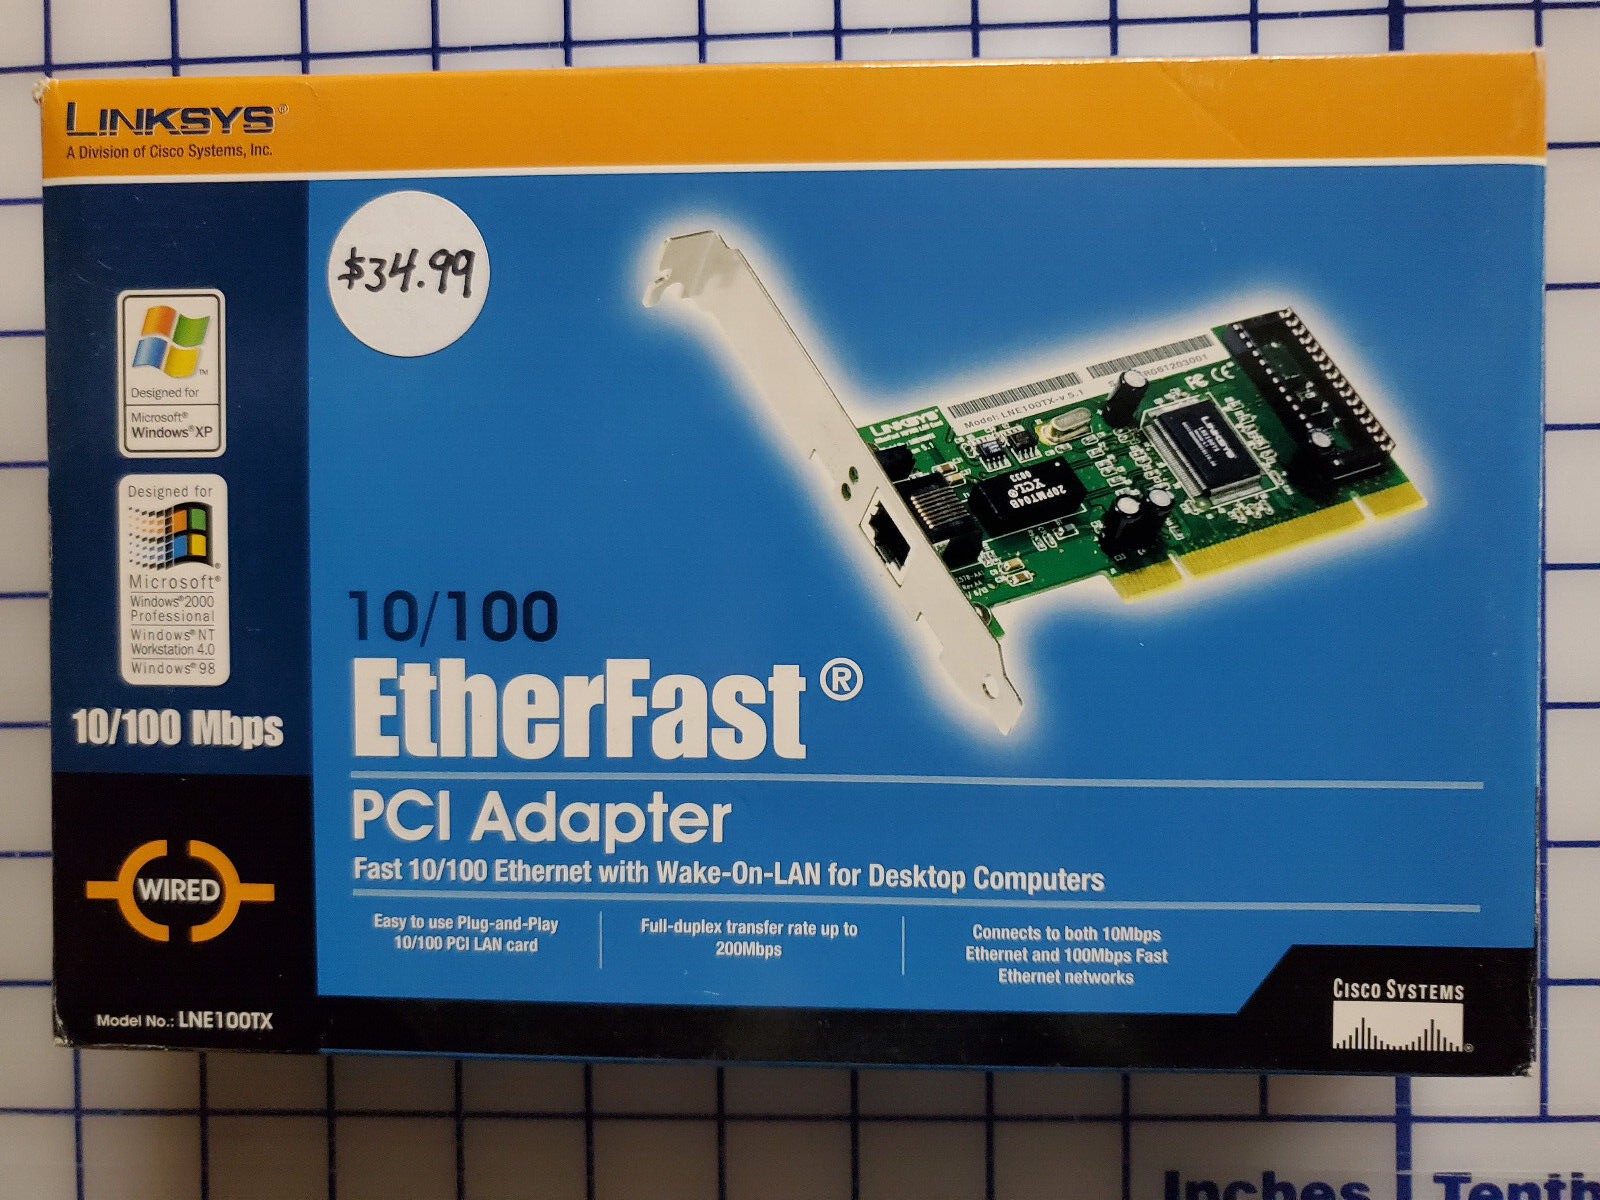 LINKSYS 10/100 MBPS ETHERFAST PCI ADAPTER - LNE100TX